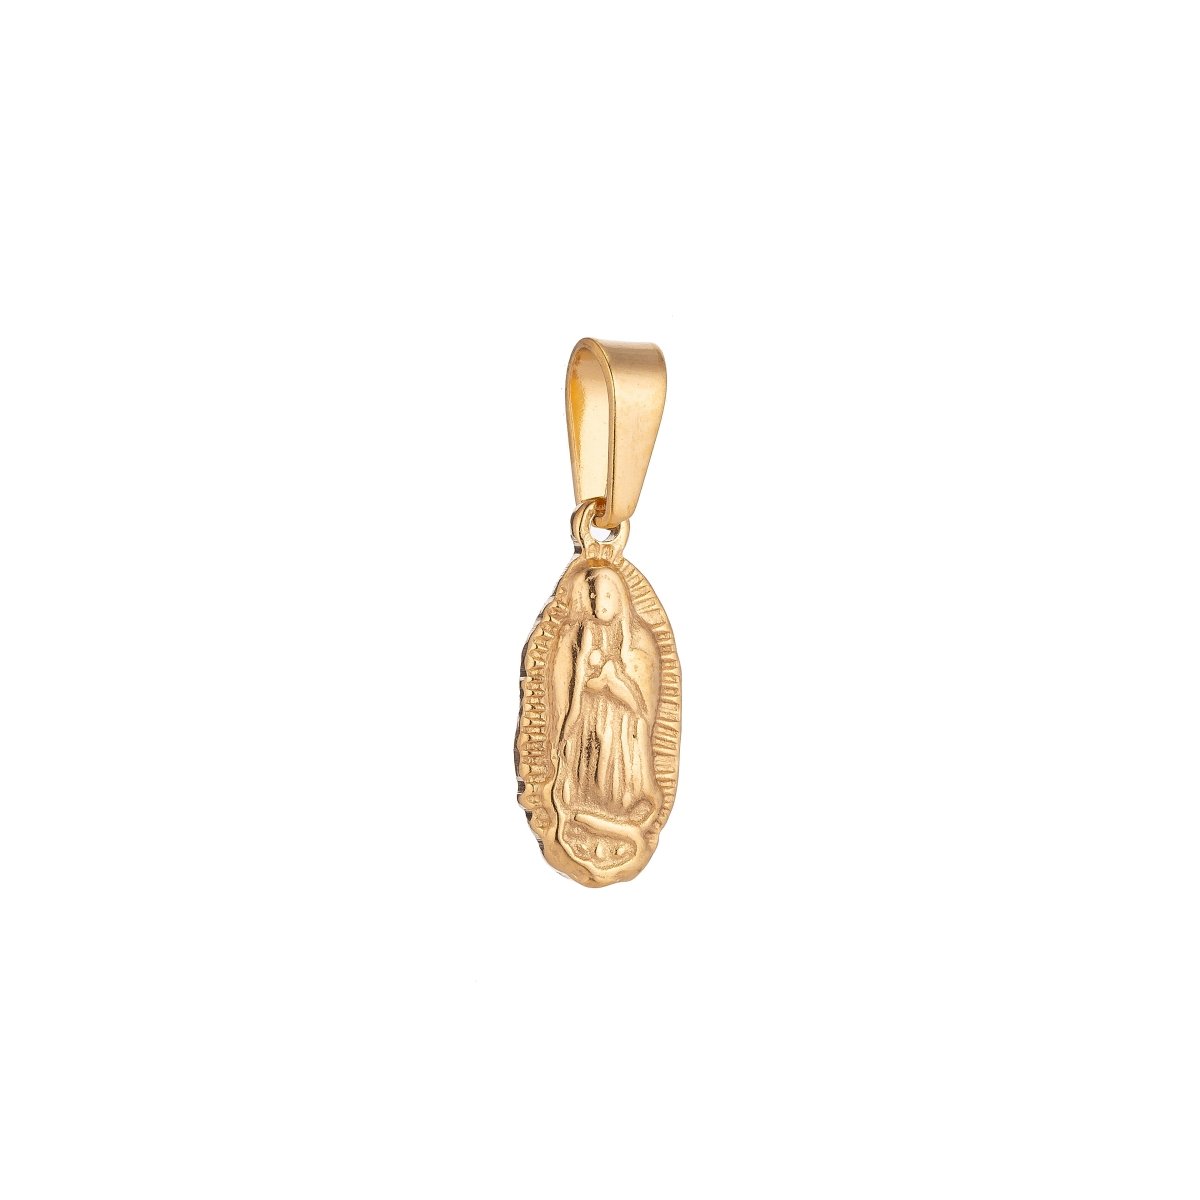 DEL- 24K Gold Filled Stainless Steel Mother Mary Pray Miraculous Lady Charm Pendant Bails Findings for Earring Necklace Jewelry Making Supplies - DLUXCA